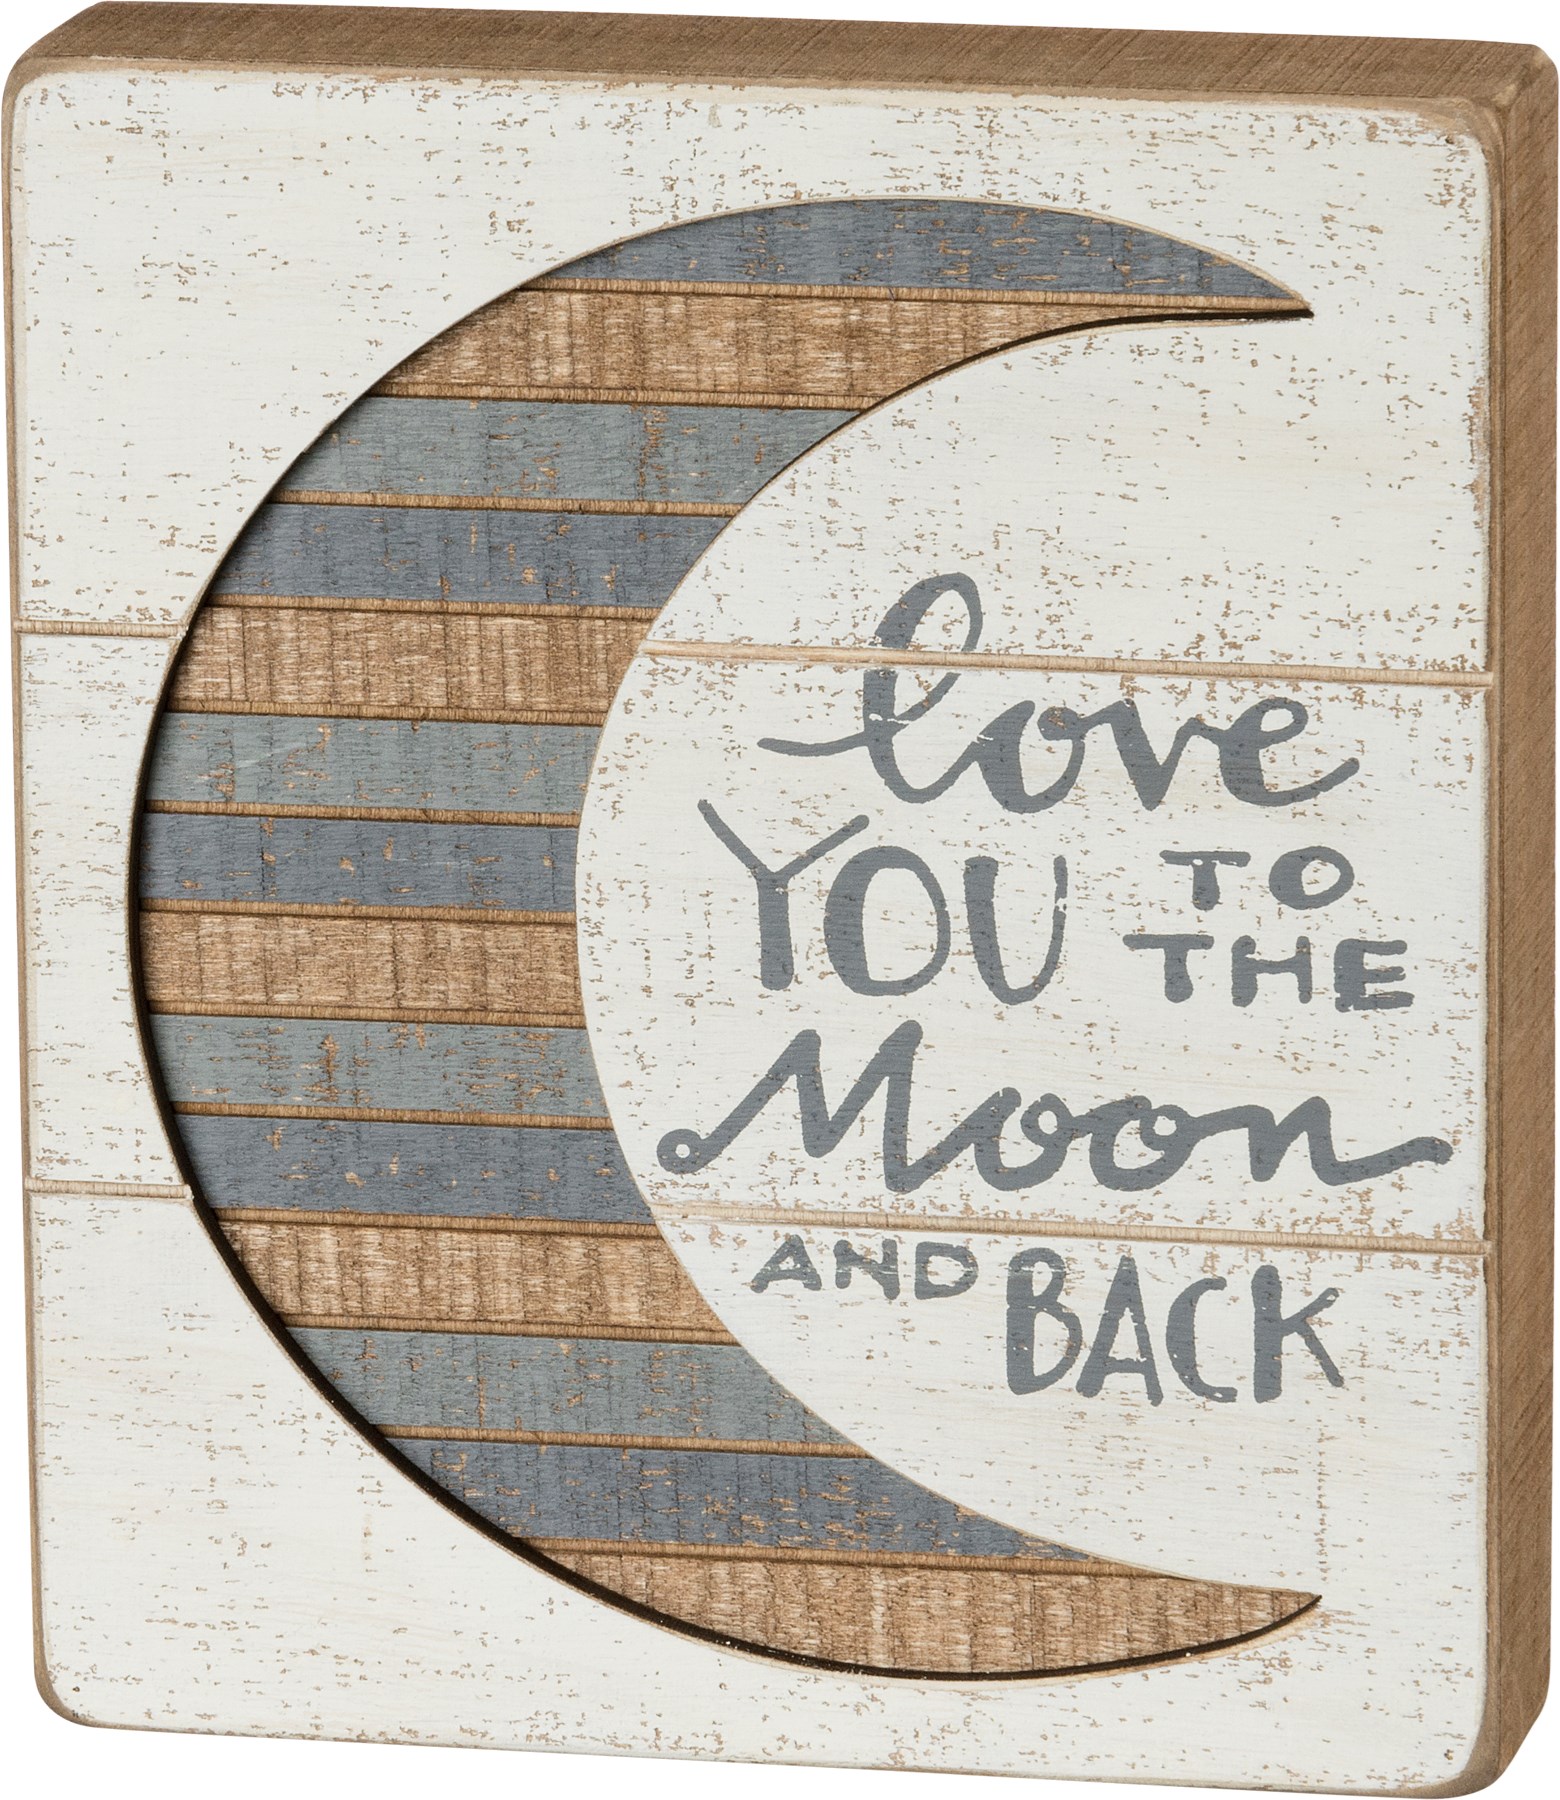 I LOVE YOU ALL THE WAY TO THE MOON AND BACK WOODEN CHIC N SHABBY HEART SIGN.